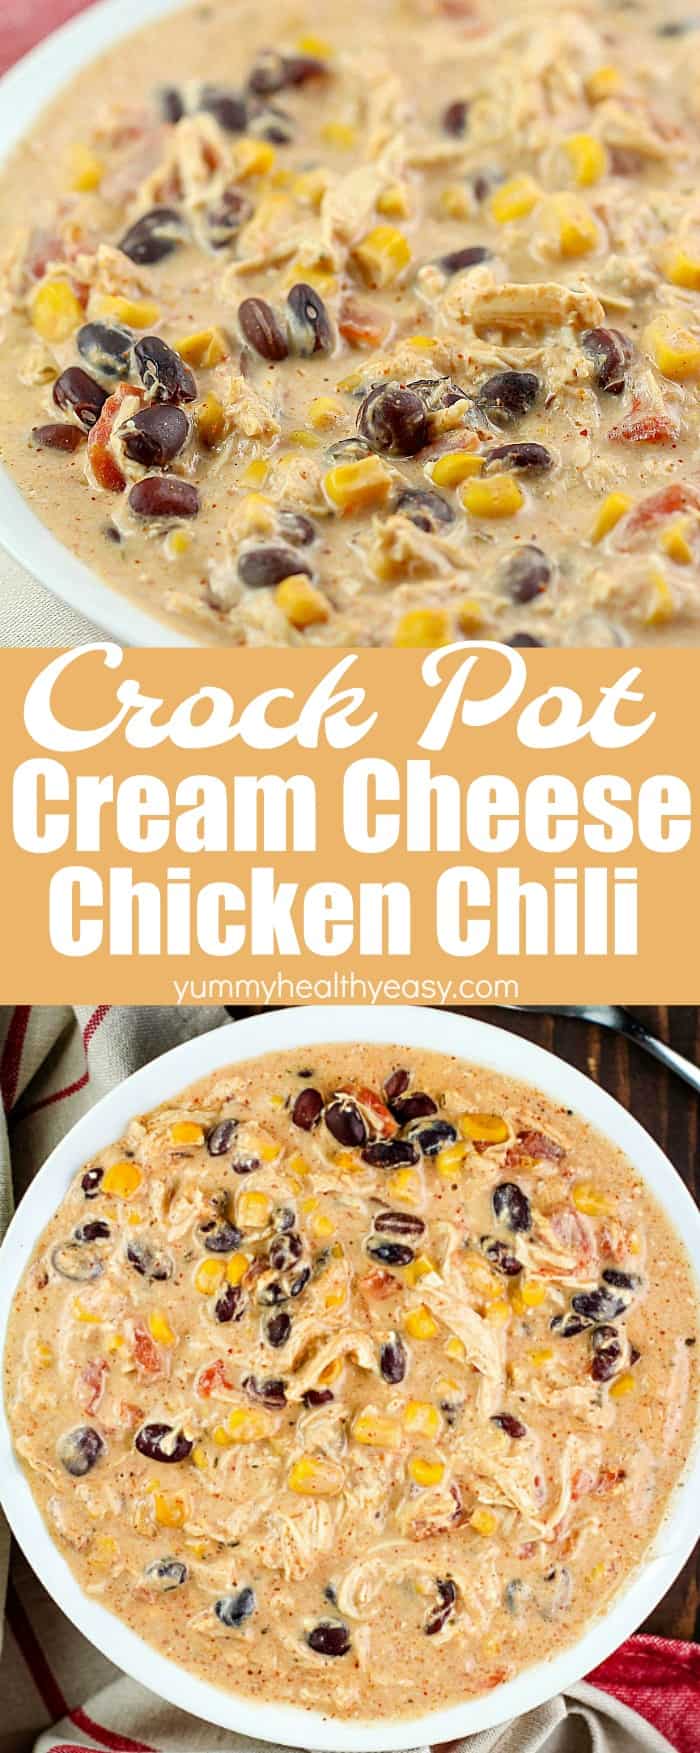 Throw this Crock Pot Cream Cheese Chicken Chili recipe into your slow cooker in the morning and you'll have a delicious chili at dinnertime your whole family will love! This is my family's favorite dinner! #chili #easy #recipe #crockpot #slowcooker #creamcheese #chicken #beans #creamy via @jennikolaus